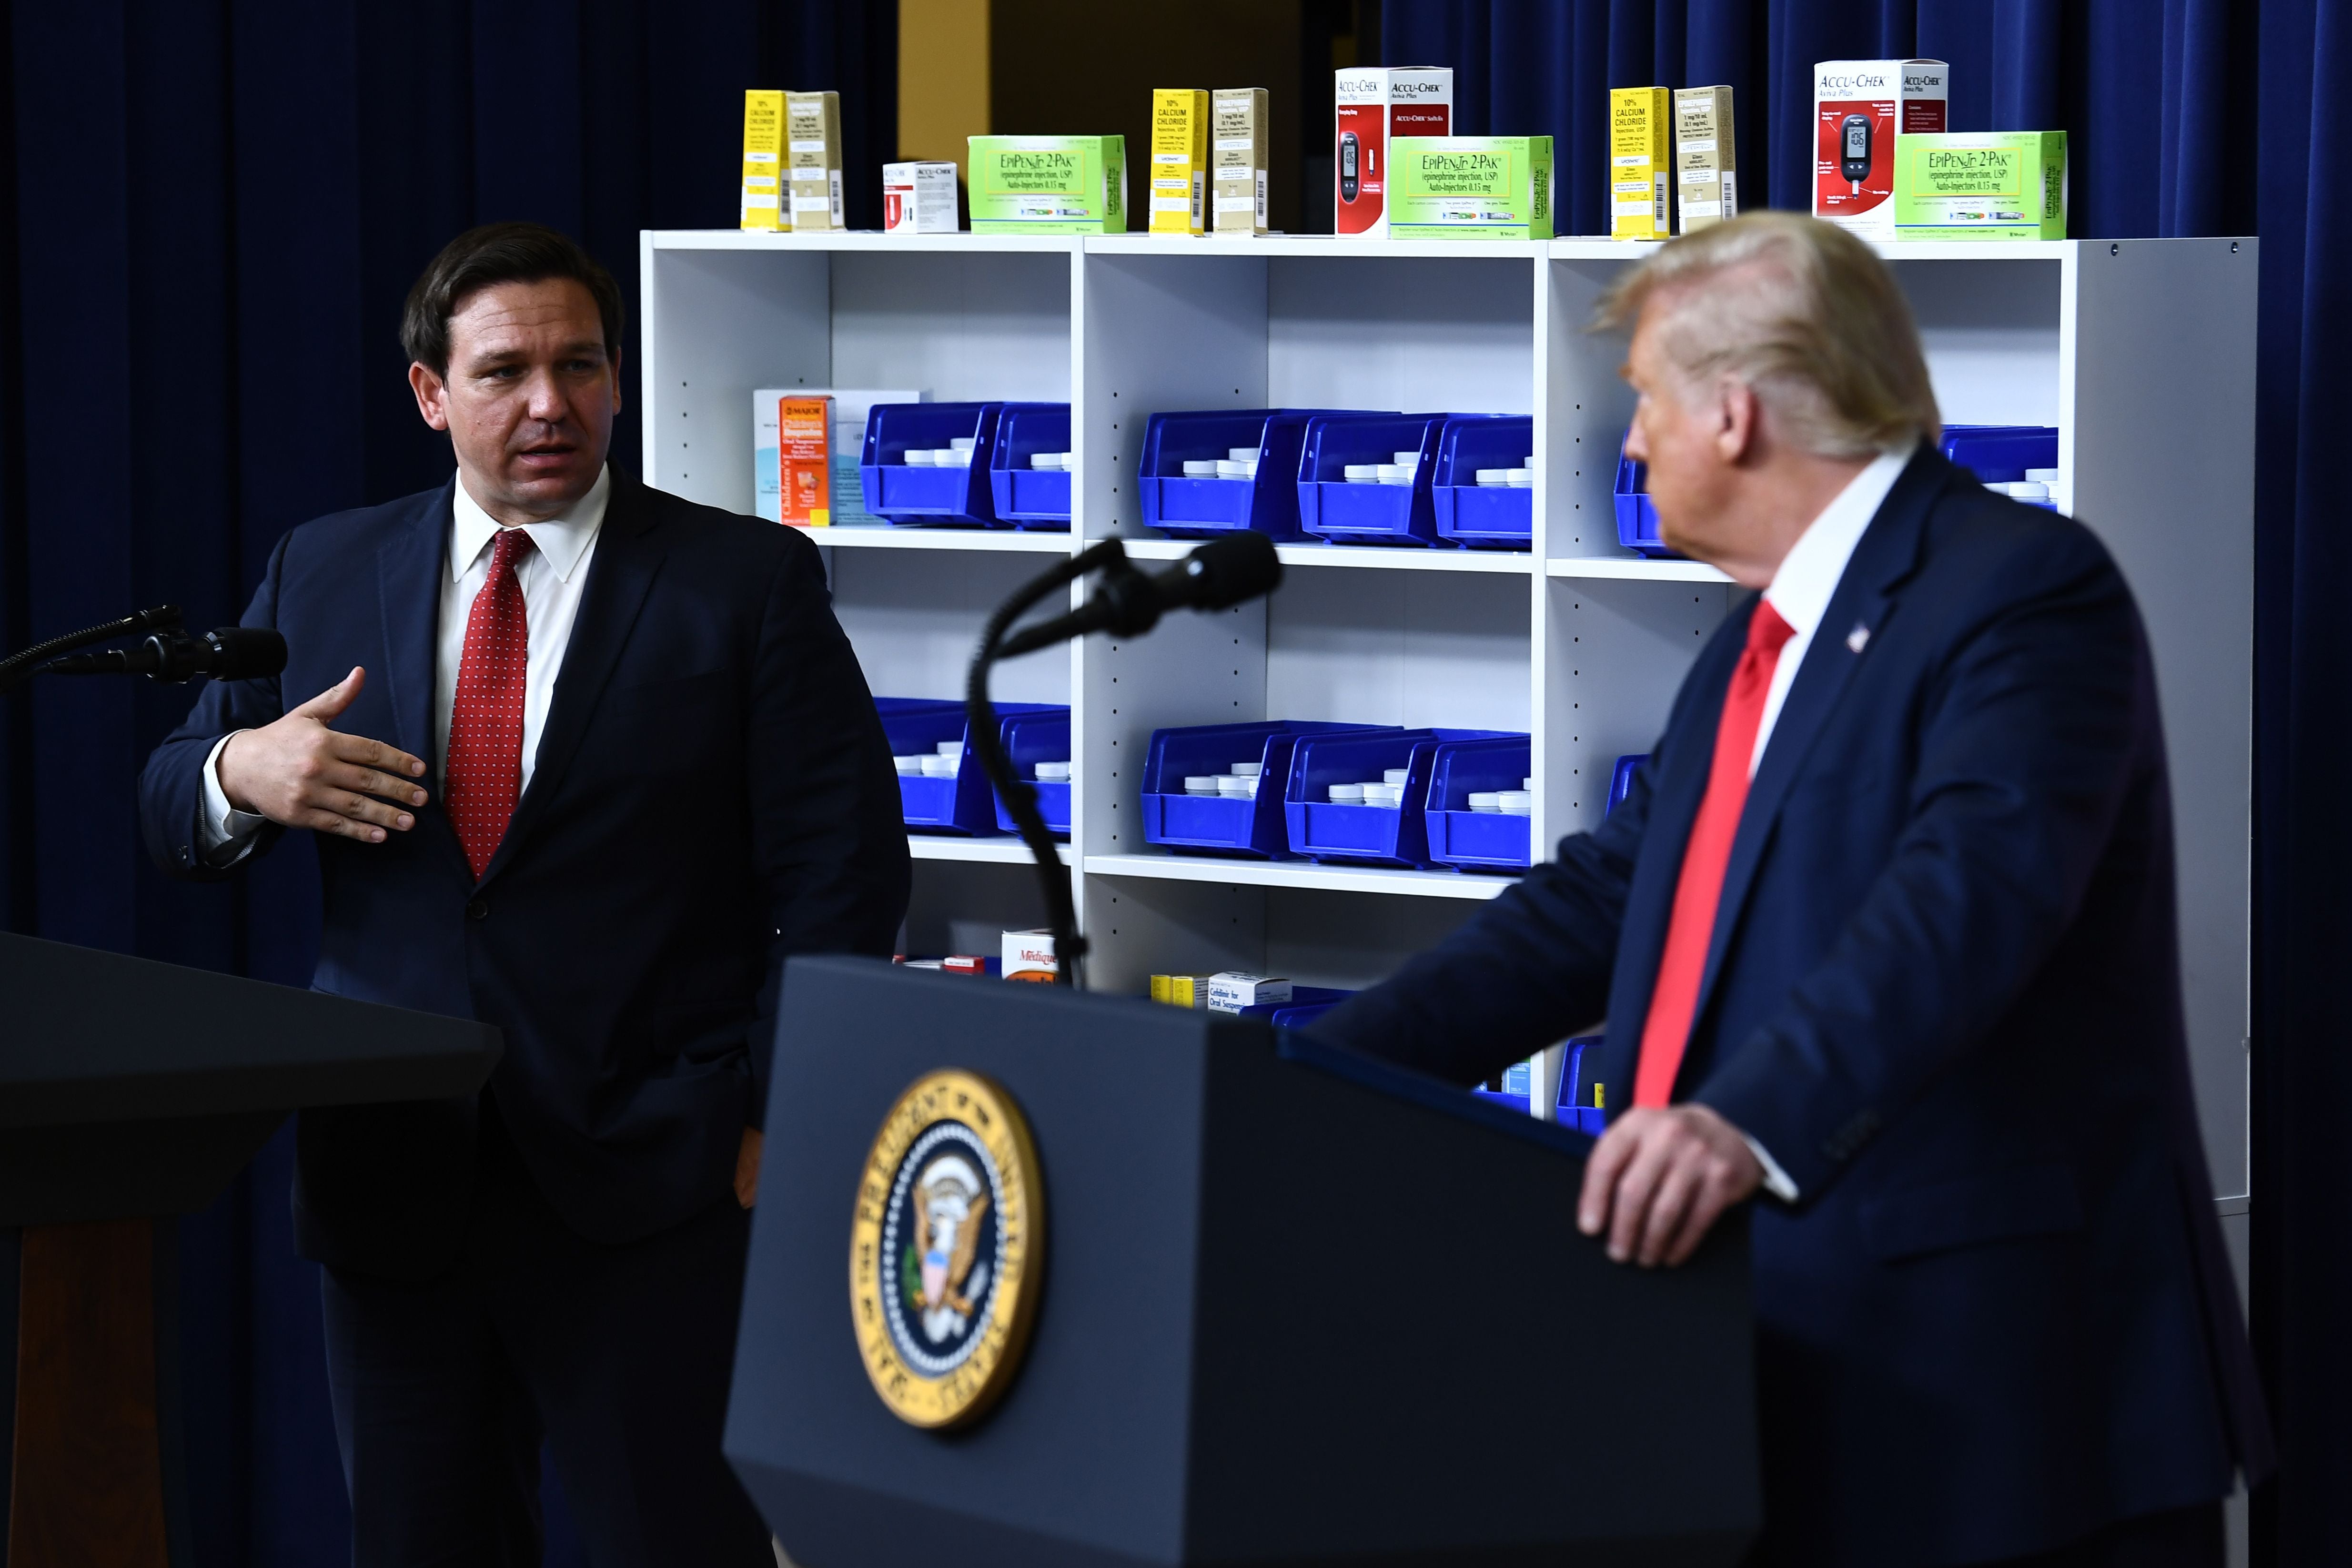 Donald Trump and Ron DeSantis speaking together at the White House on 24 July 2020